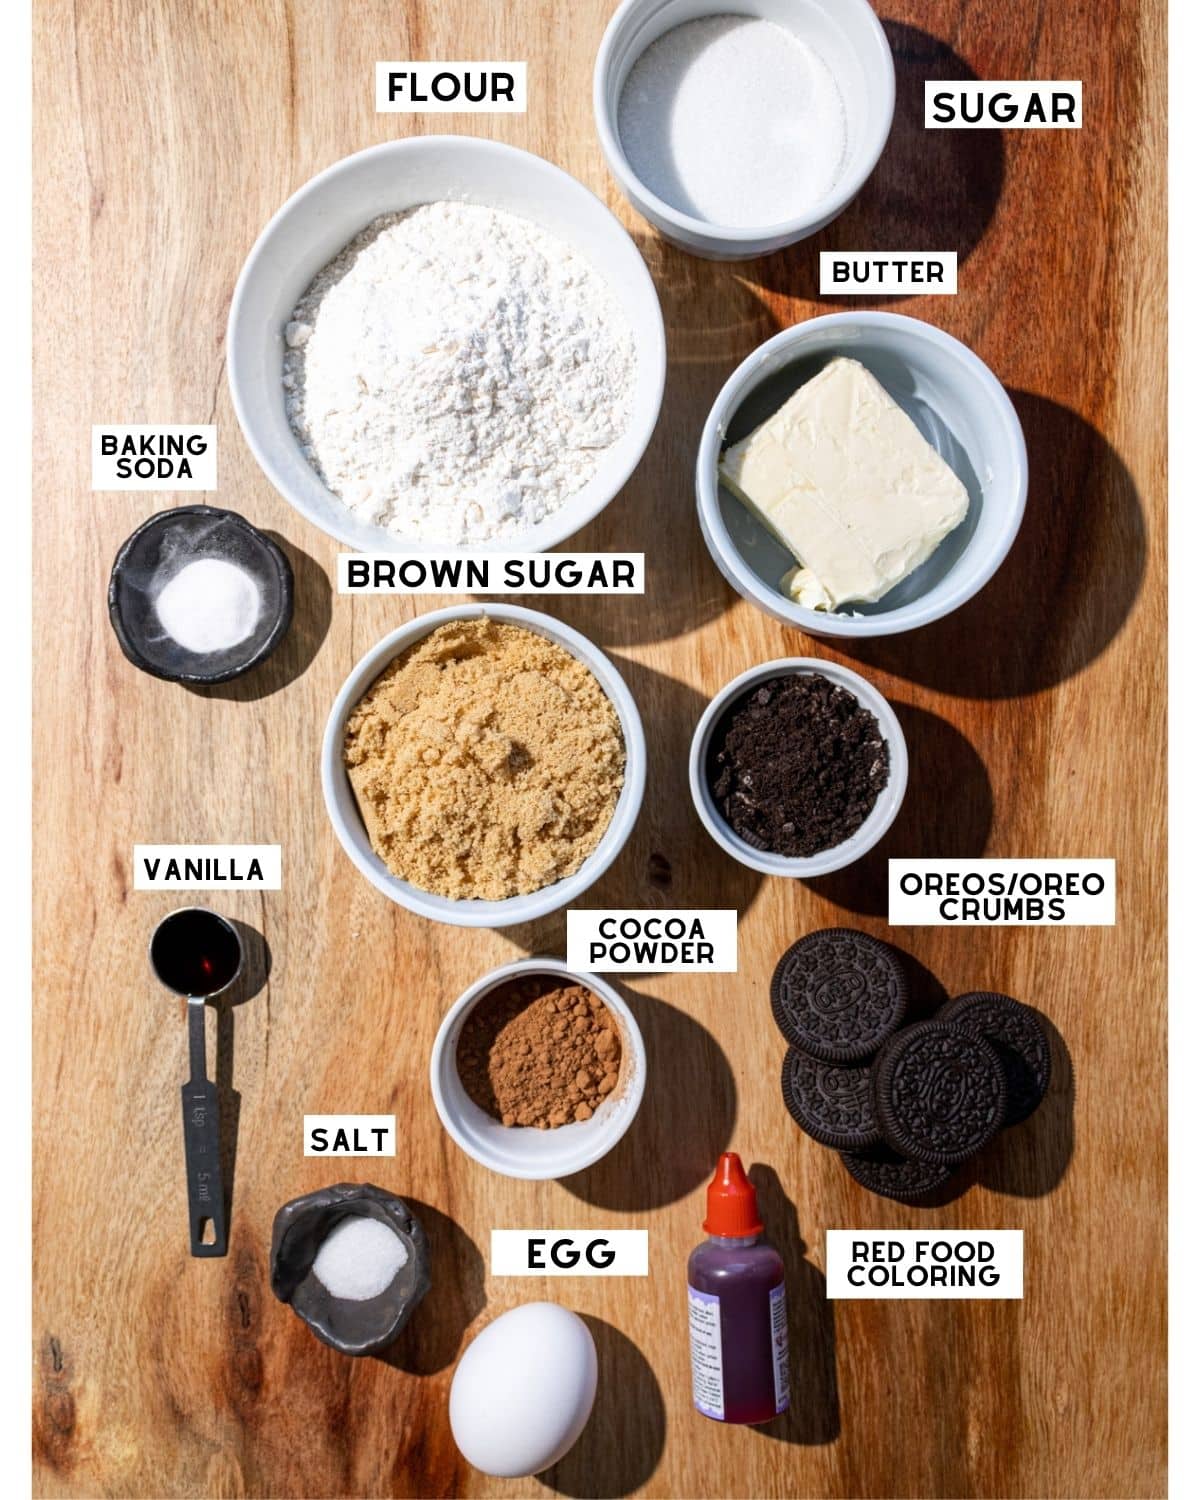 Red velvet oreo cookie ingredients in bowls with labels